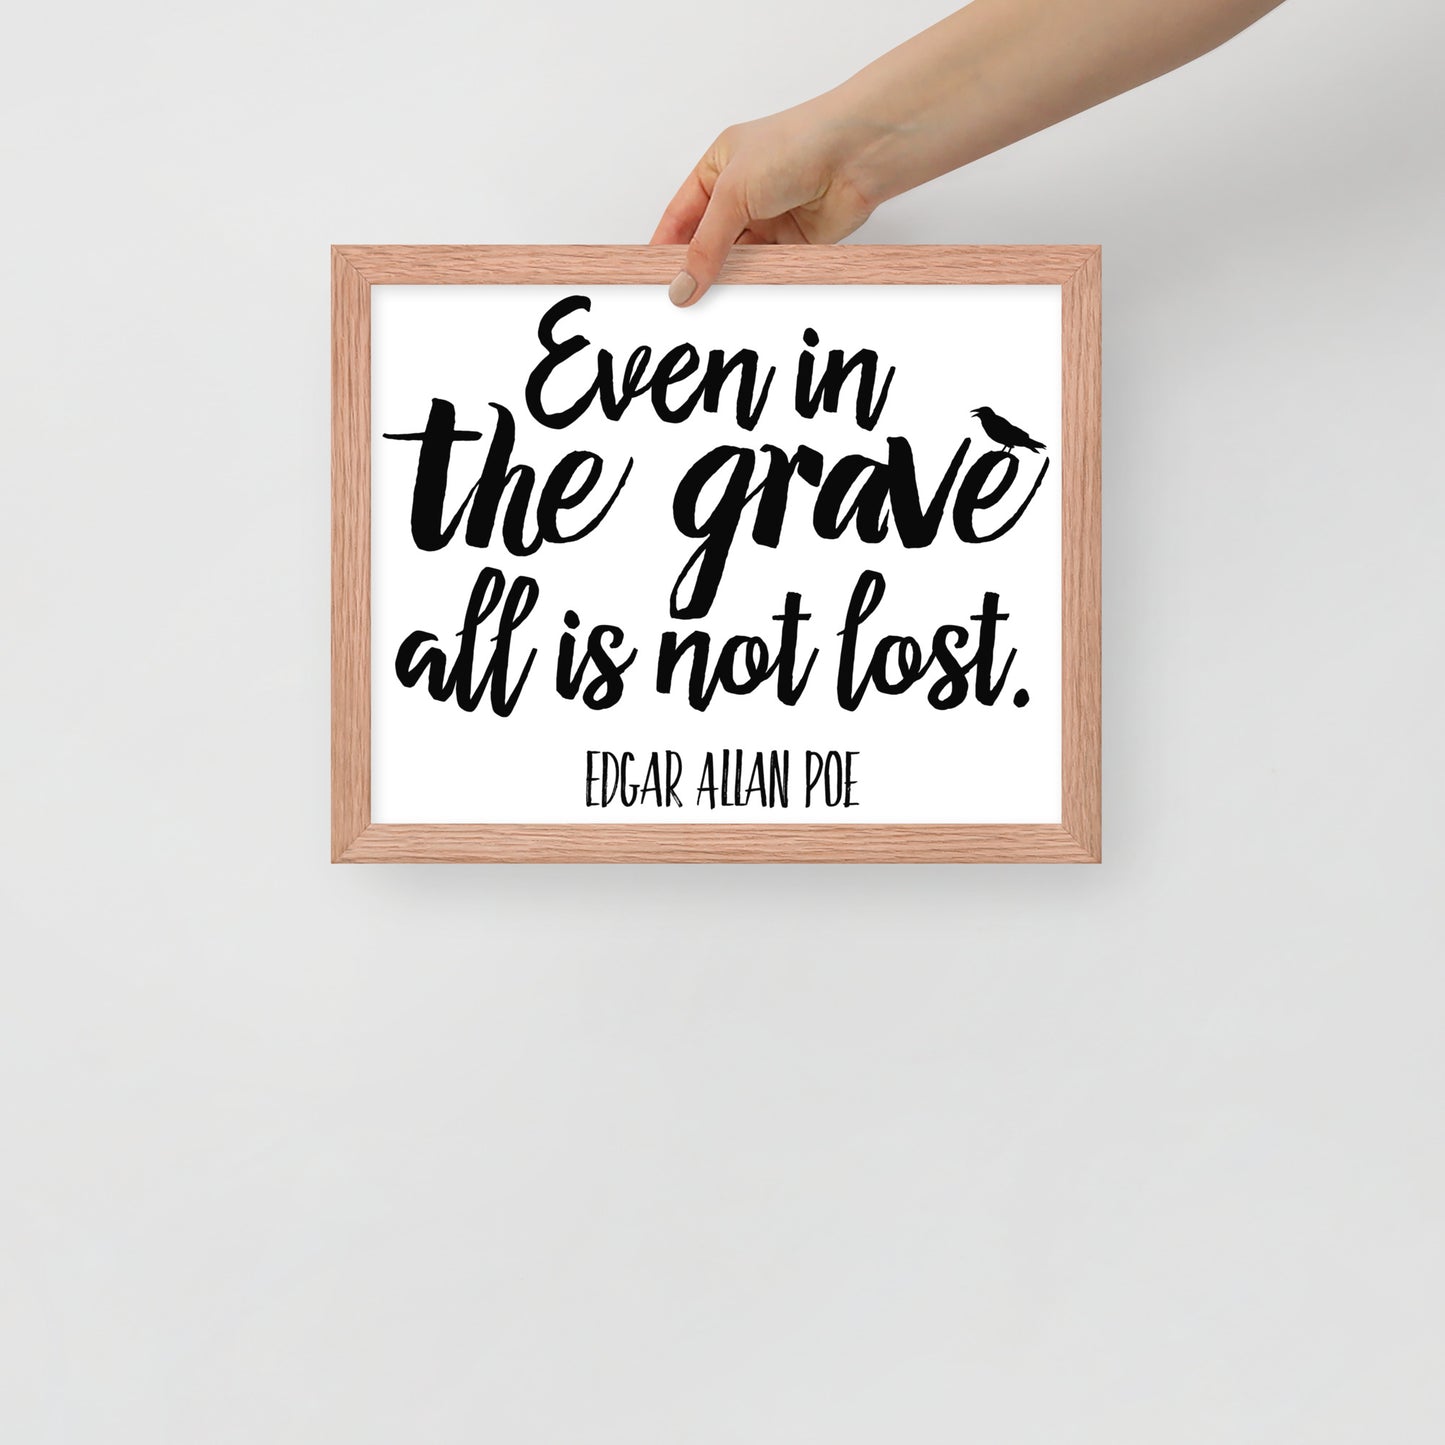 Even in the Grave - Edgar Allan Poe Quote Framed Poster - 11 x 14 Red Oak Frame